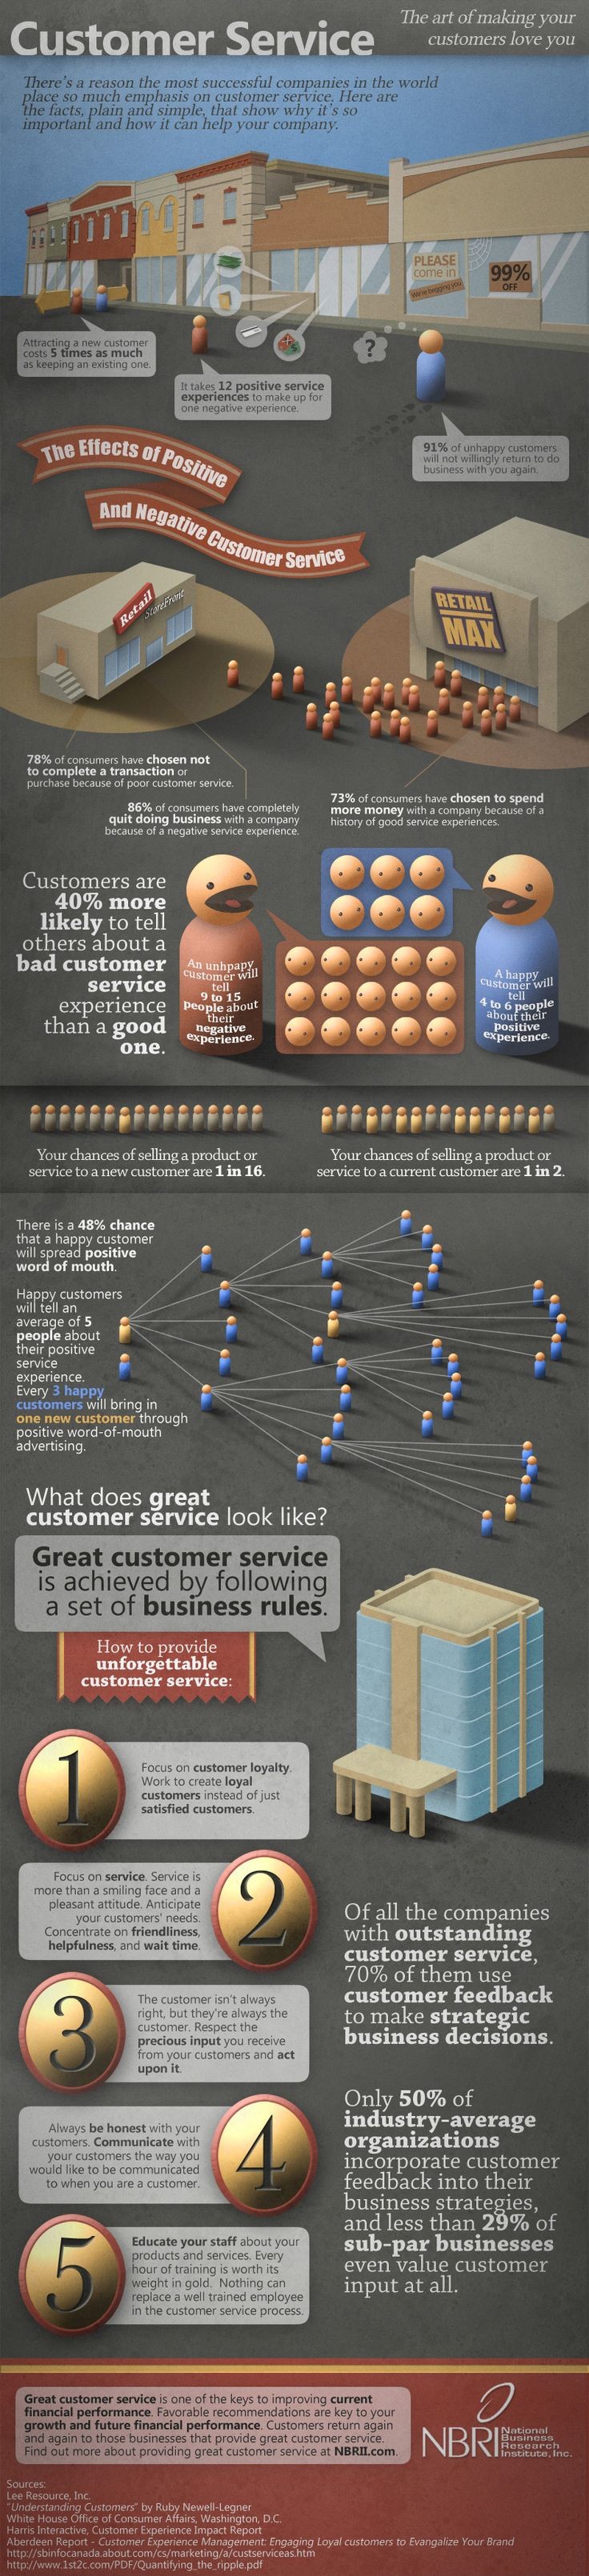 NBRI Customer Service Infographic to help every co...